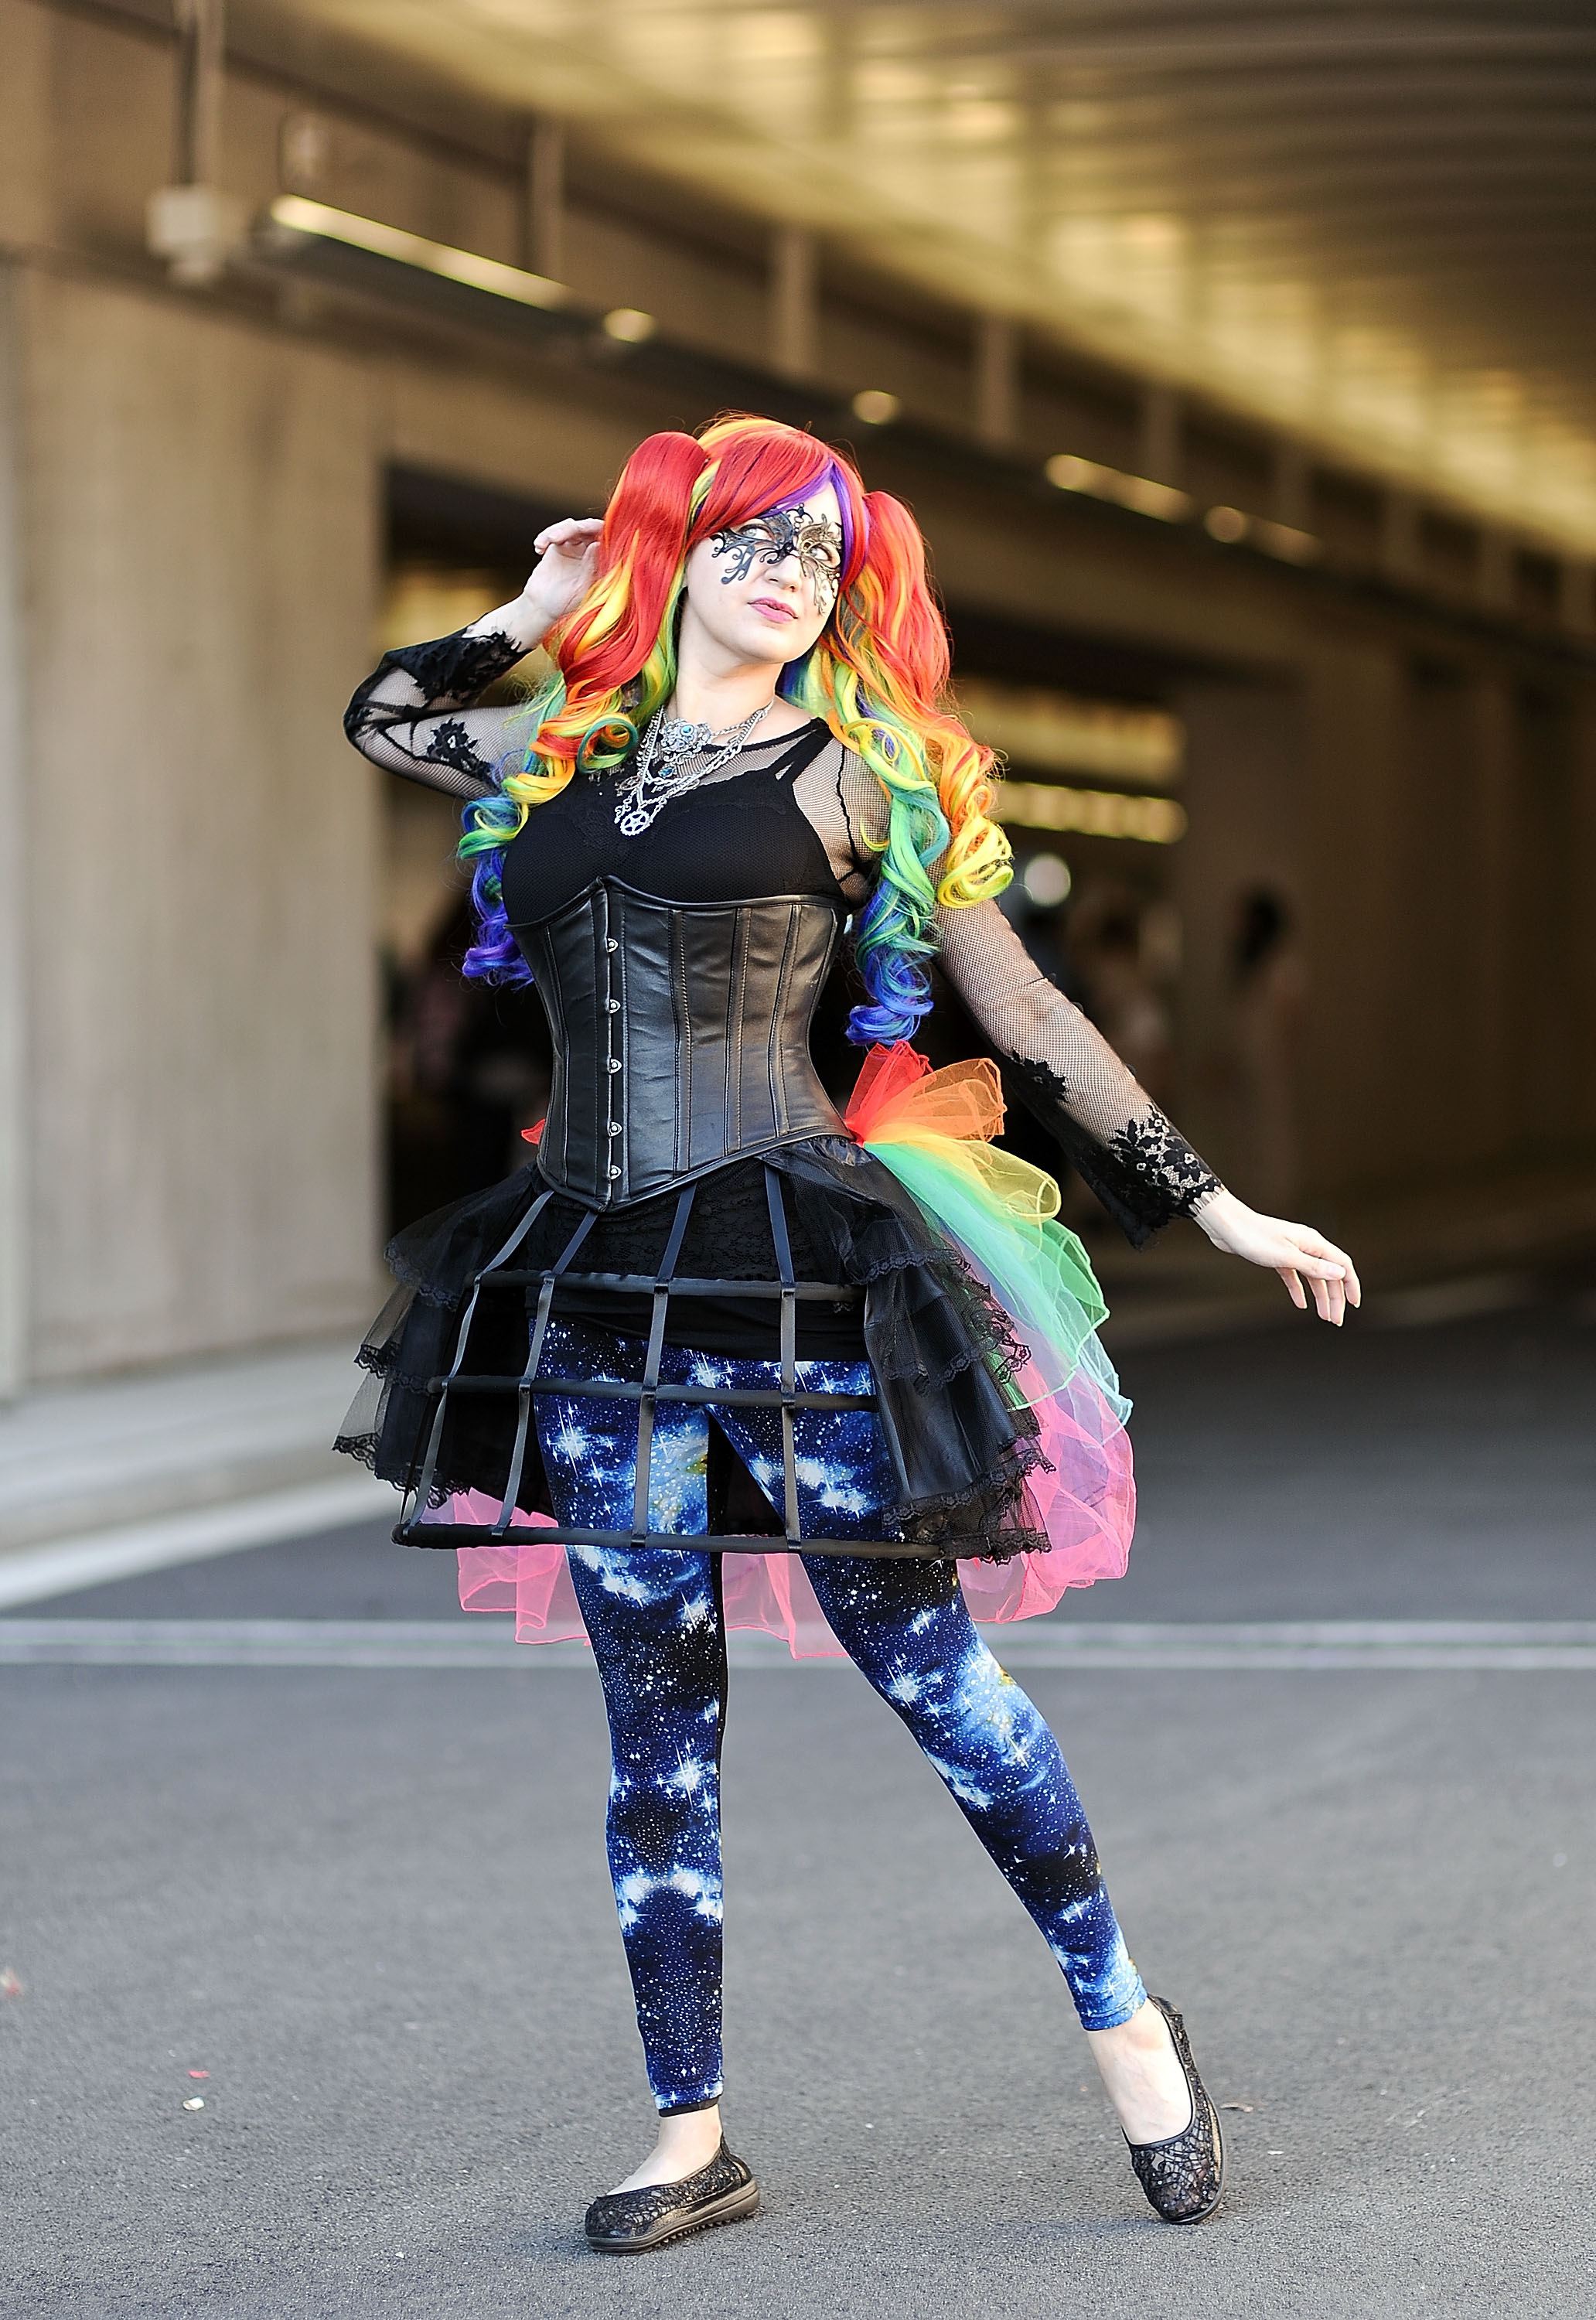 A Comic Con attendee poses during the 2014 New York Comic Con at Jacob Javitz Center on October 12, 2014 in New York City. (Daniel Zuchnik&mdash;Getty Images)